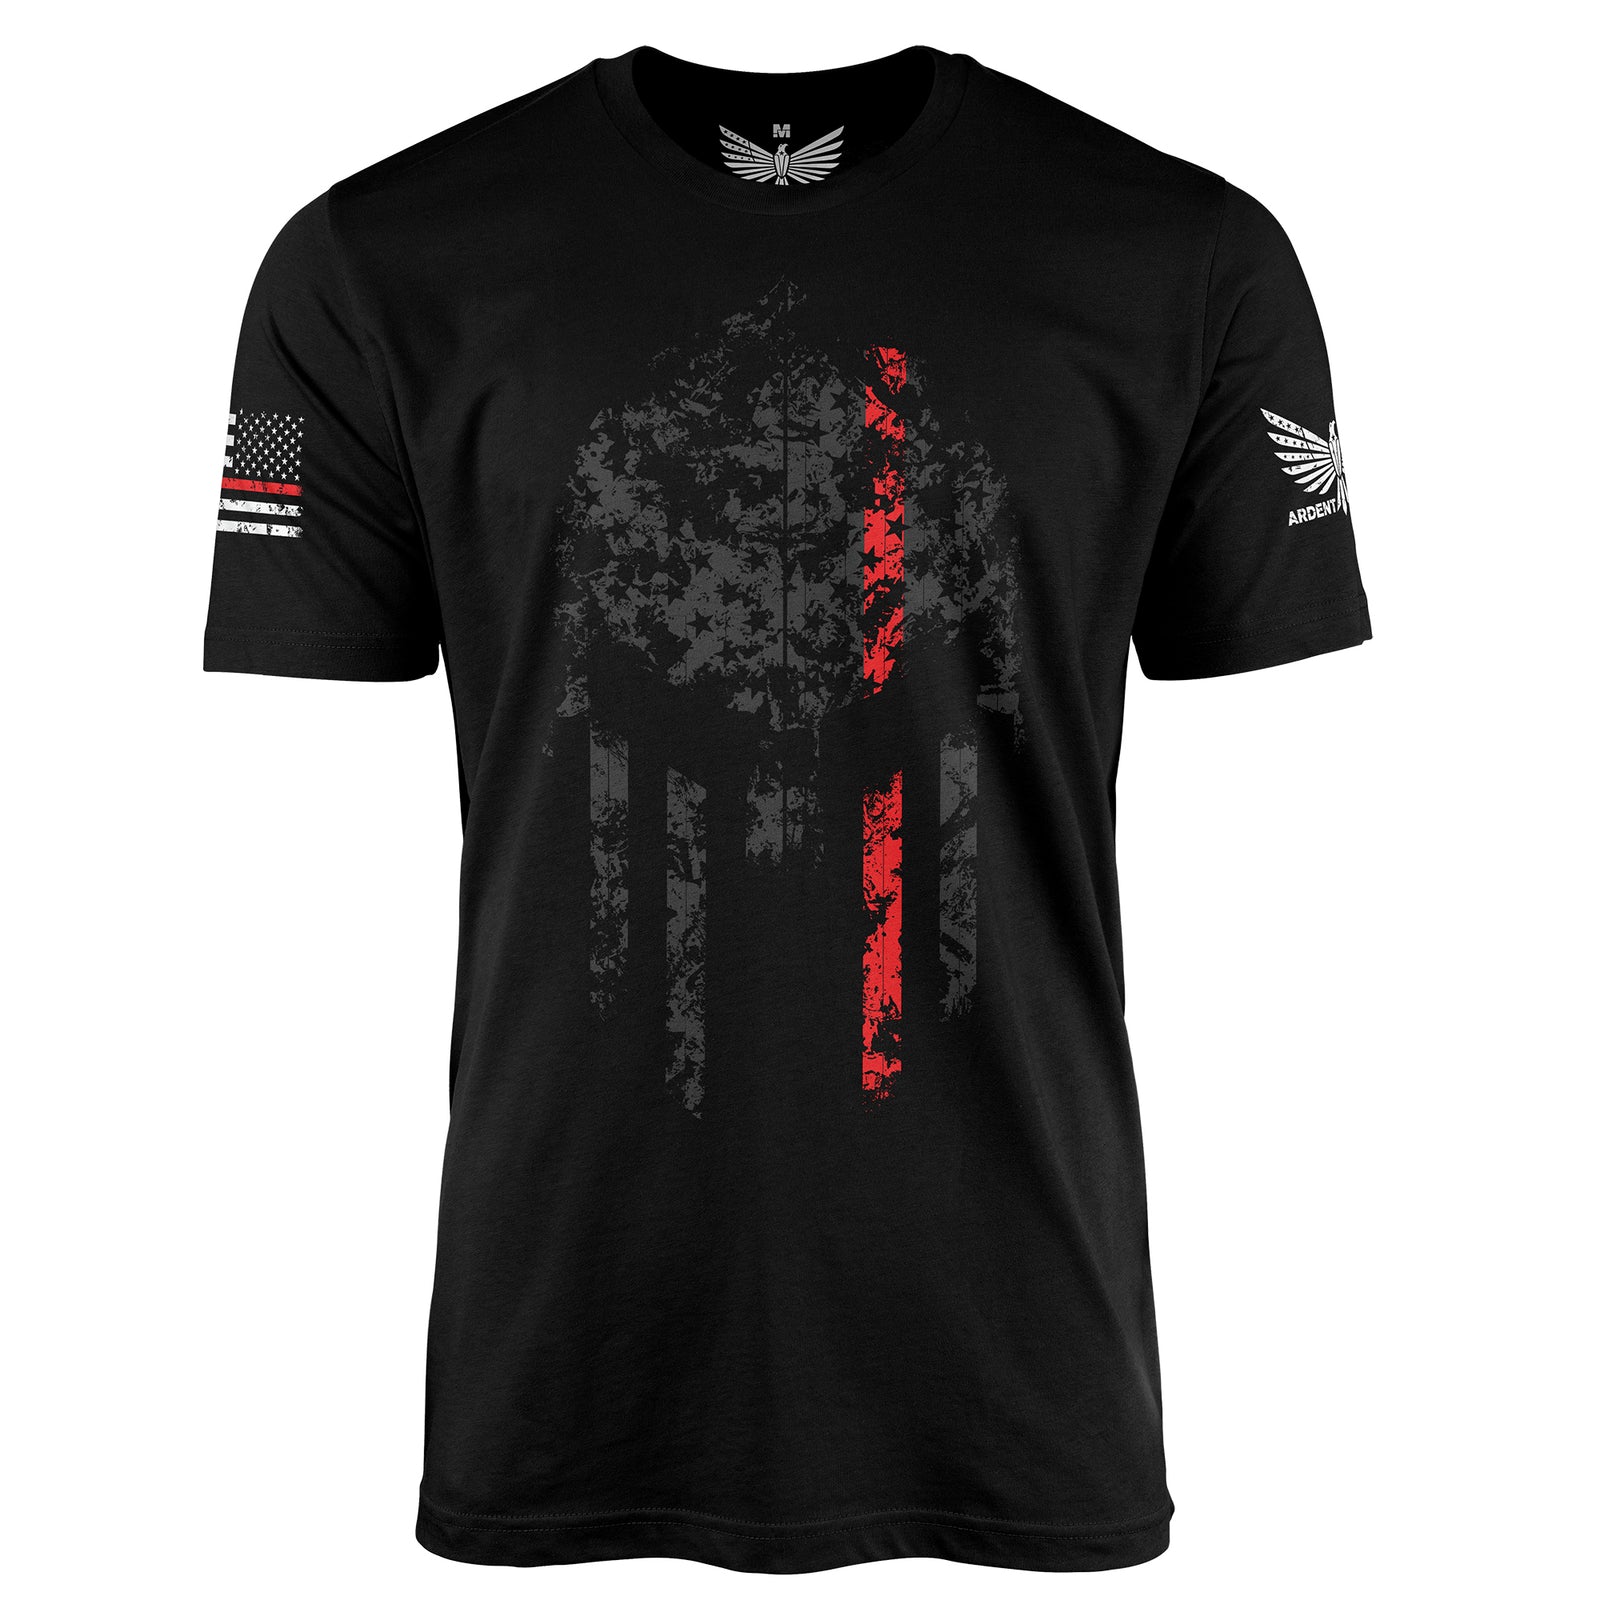 Thin Red Line Spartan-Men's Shirt-S-Ardent Patriot Apparel Co.